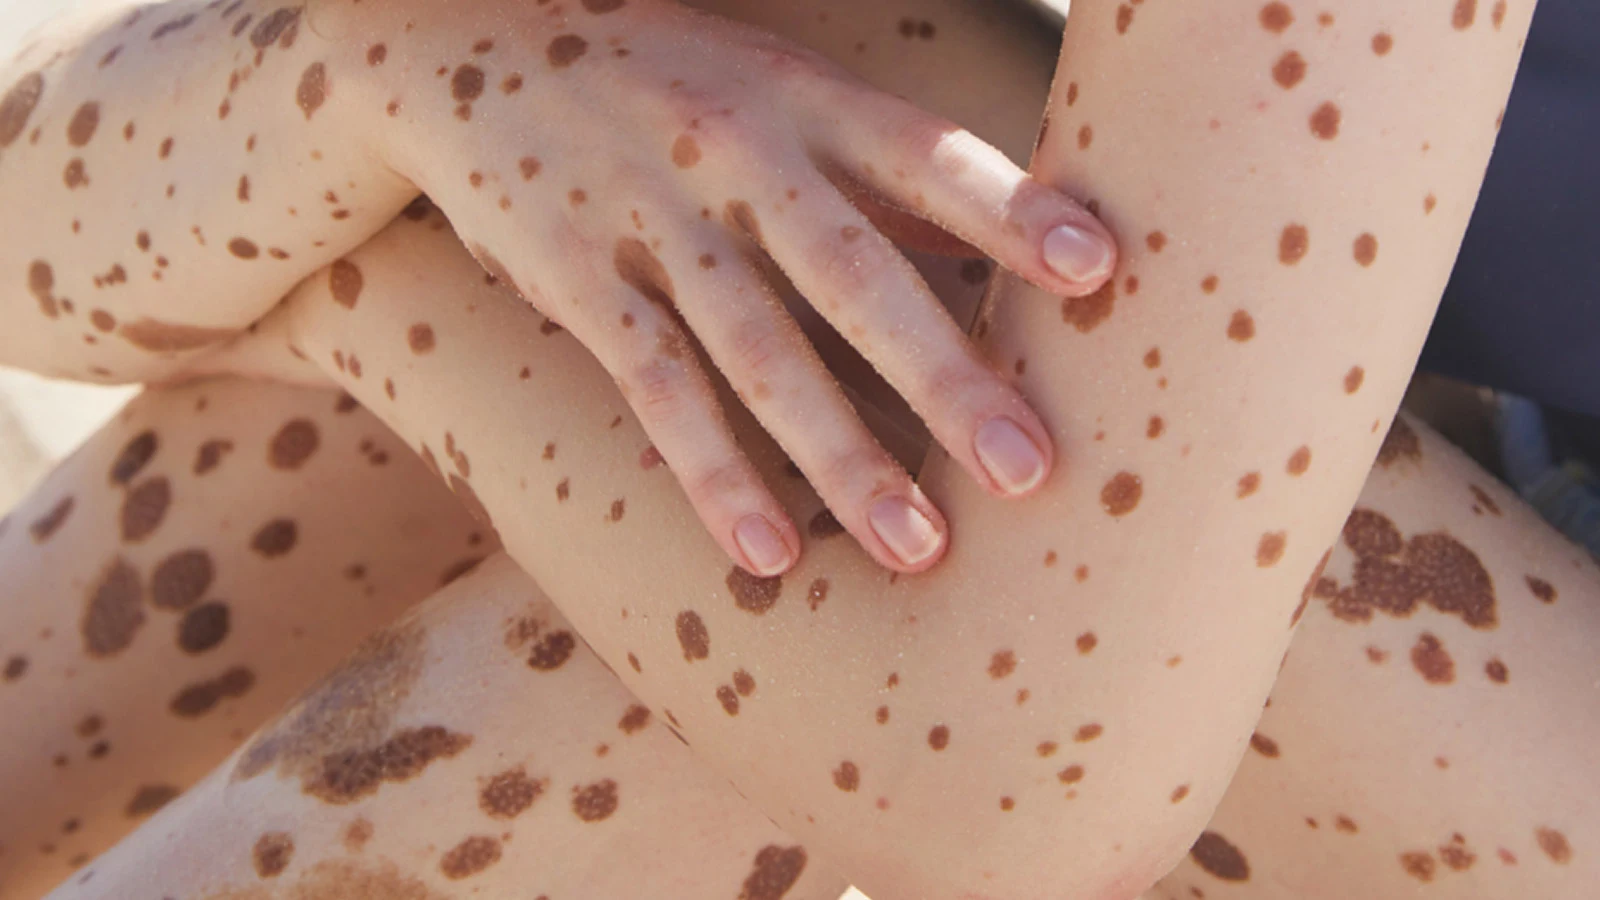 Woman with freckled skin touching her arms